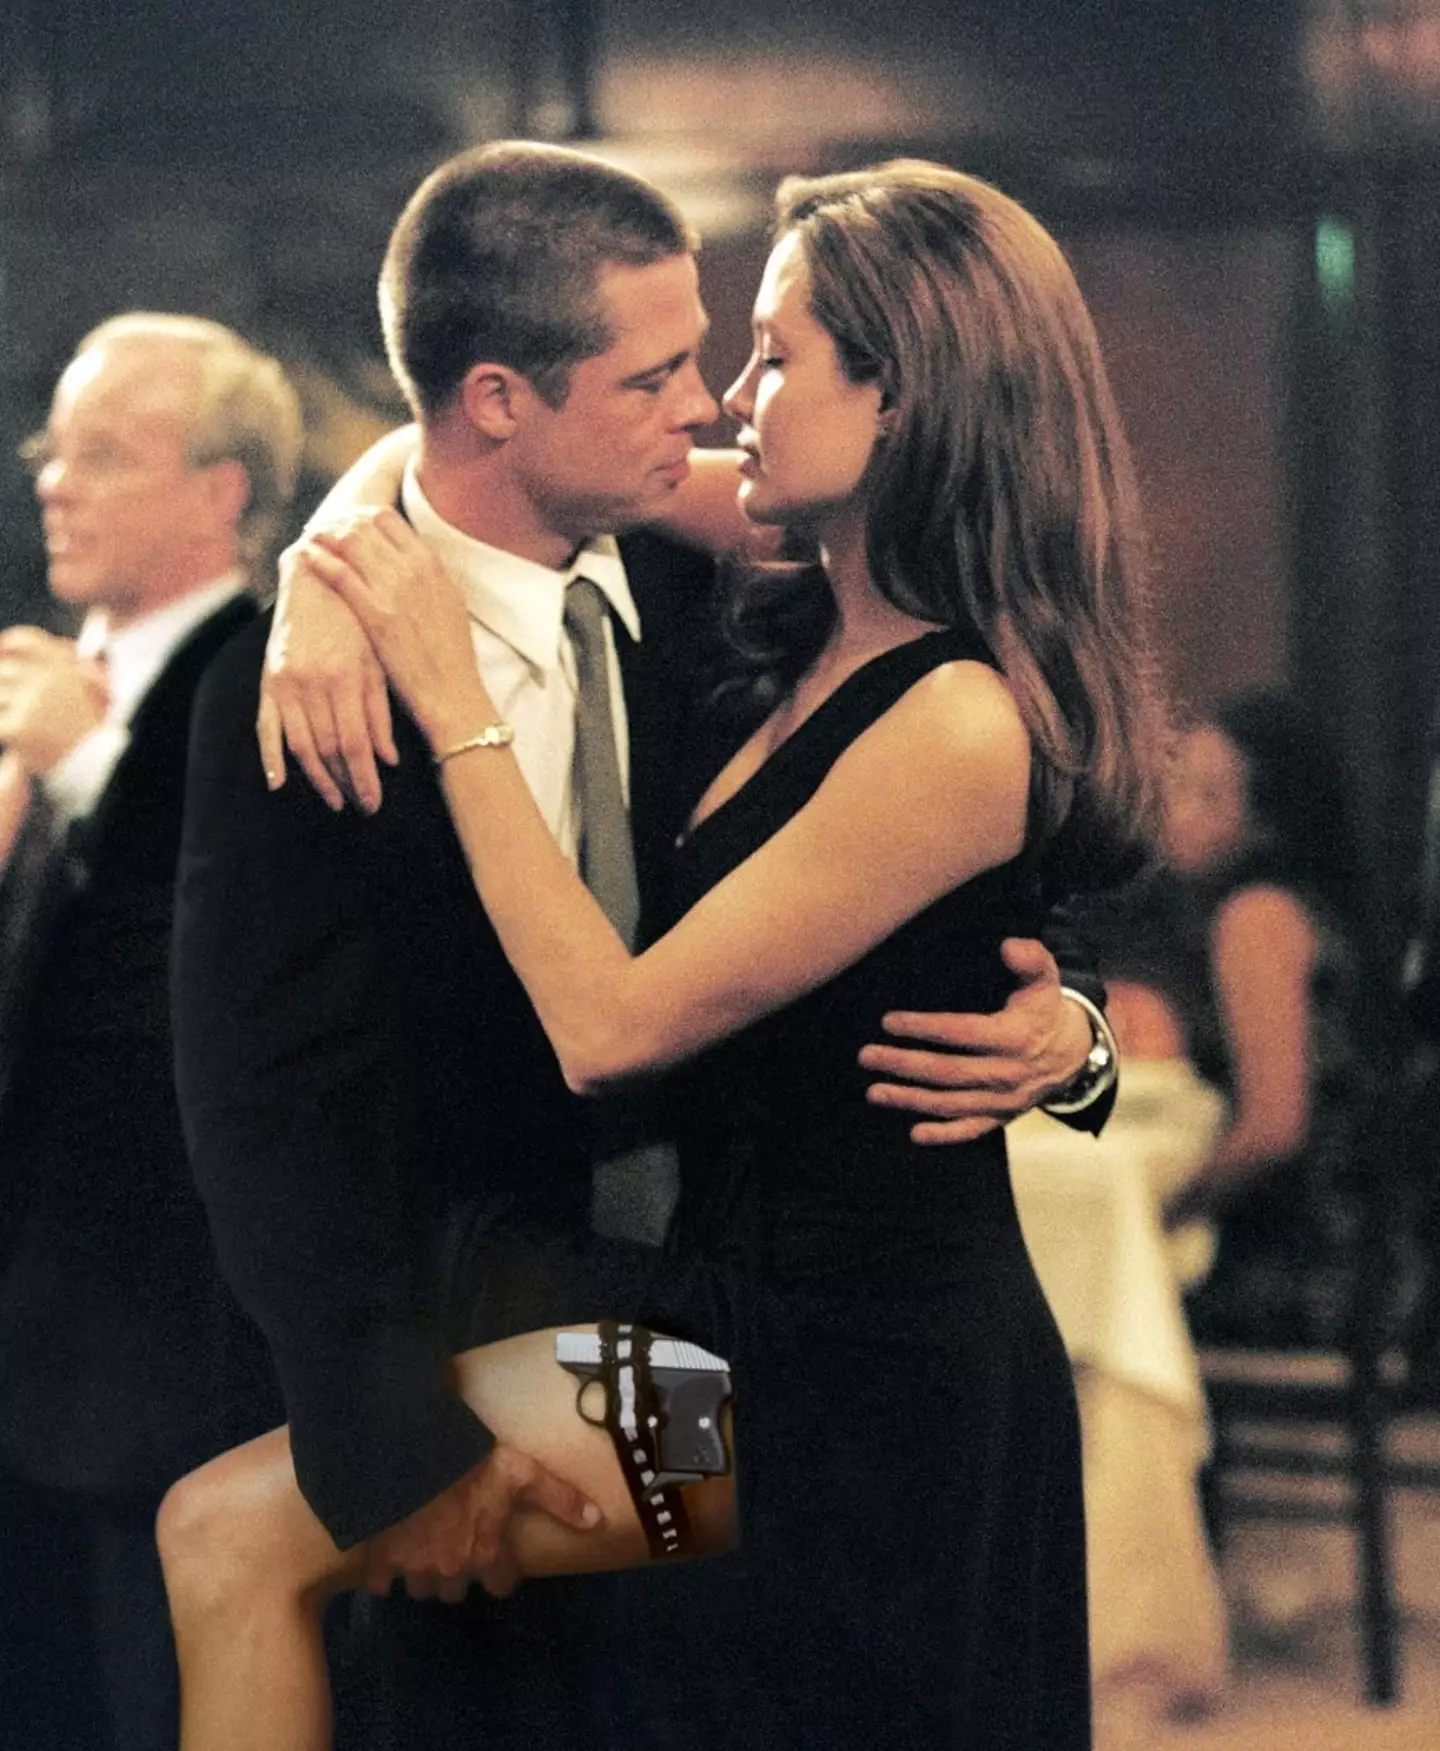 Pitt and Jolie in the 2005 film version of Mr and Mrs Smith.